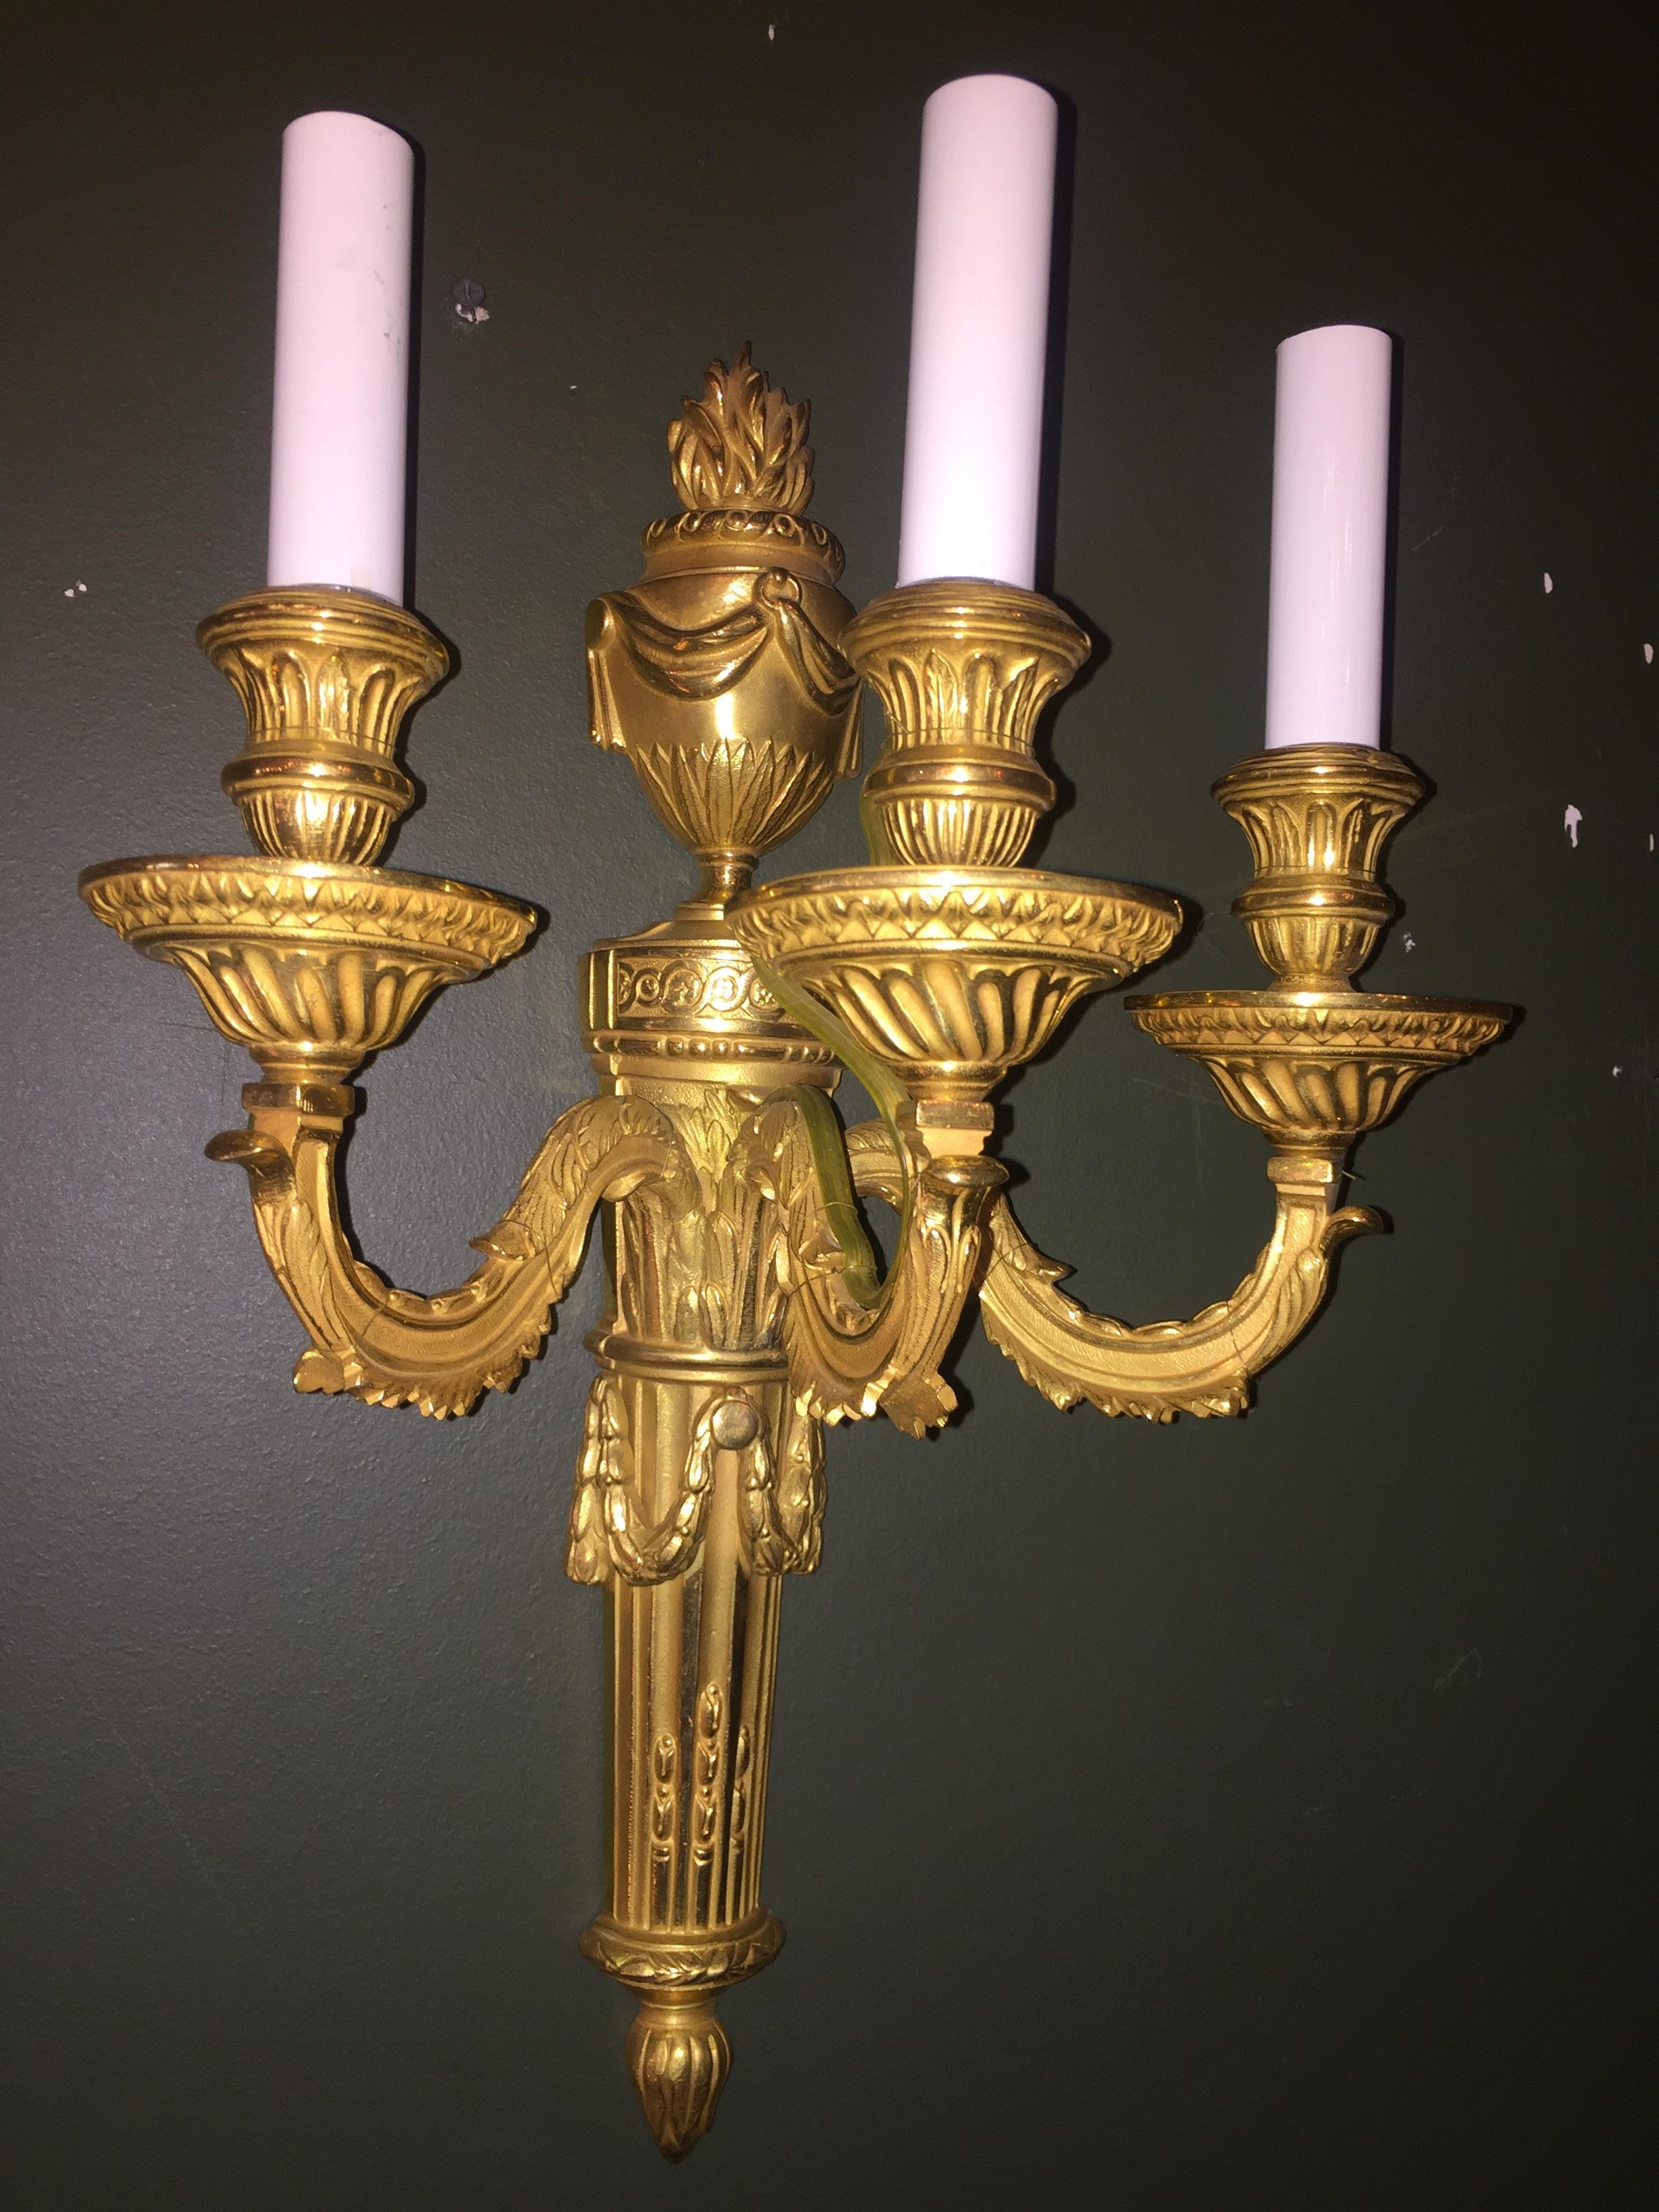 A superb set of 8  Louis XVI style gilt bronze three-arm wall light sconces of fine craftsmanship embellished with fine urns on the back adorned with flames on the top.